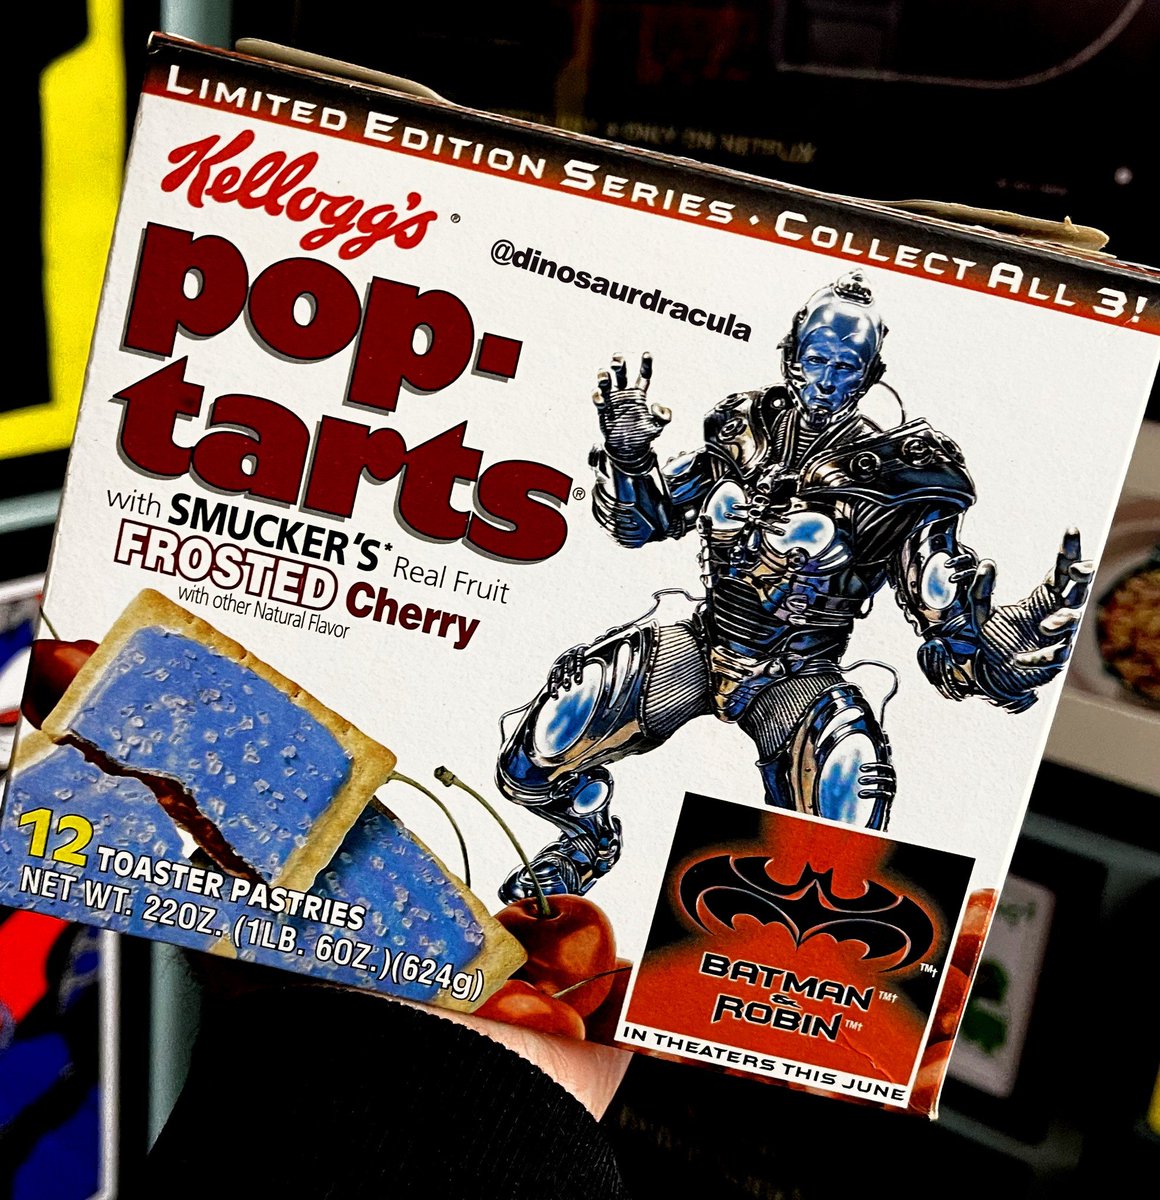 Breakfast peaked in 1997 with the release of Mr. Freeze Pop-Tarts. They were so cool.